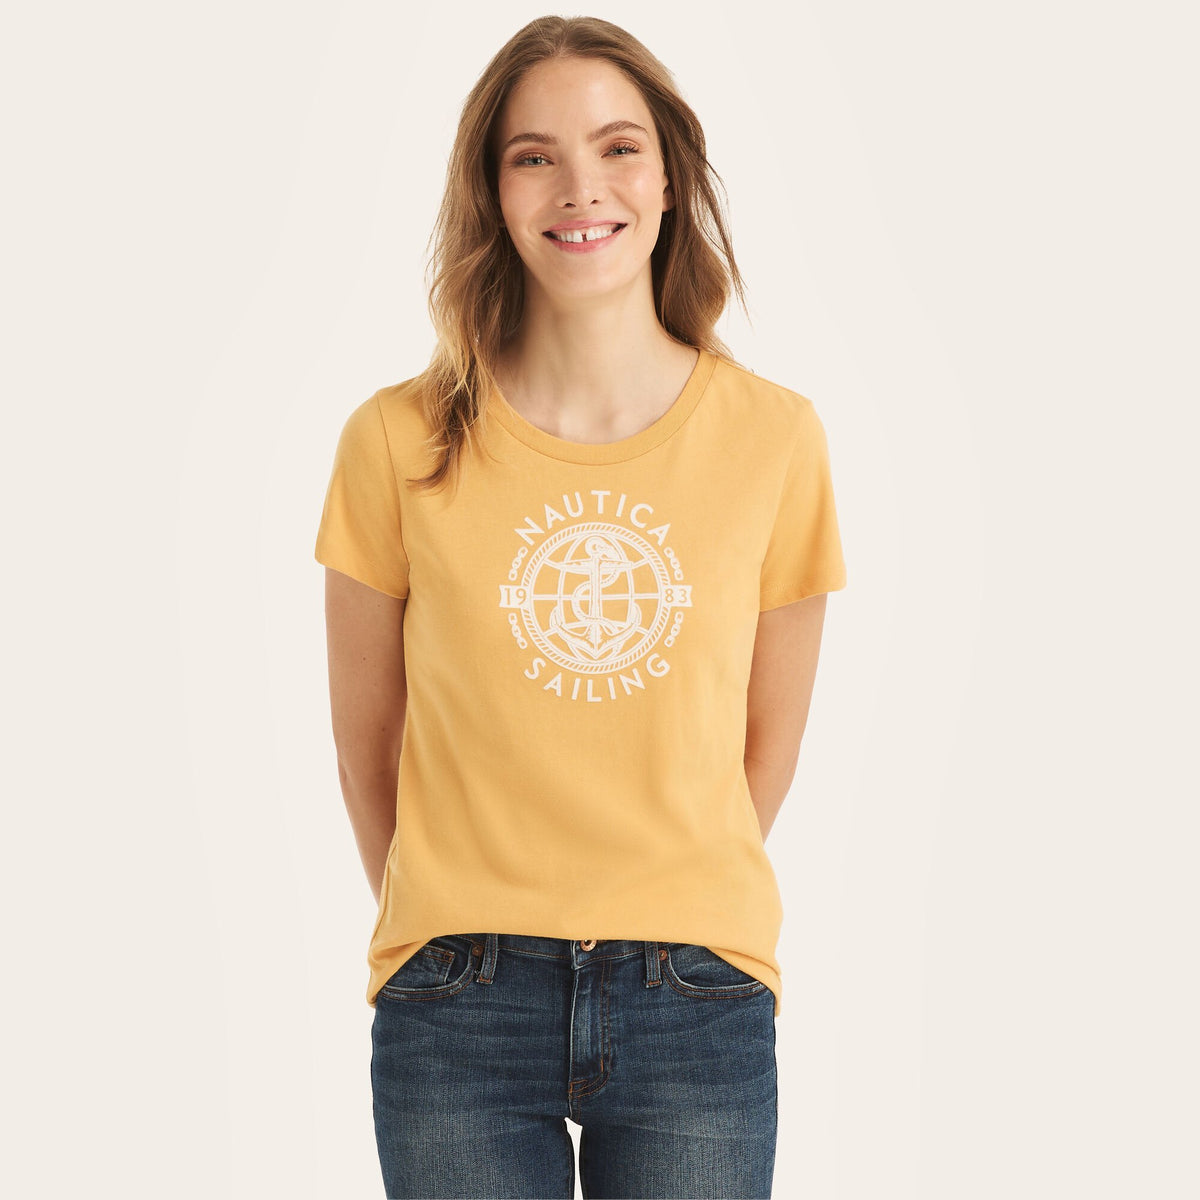 Nautica Women's Sustainably Crafted Sailing Logo Graphic T-Shirt Golden Apricot